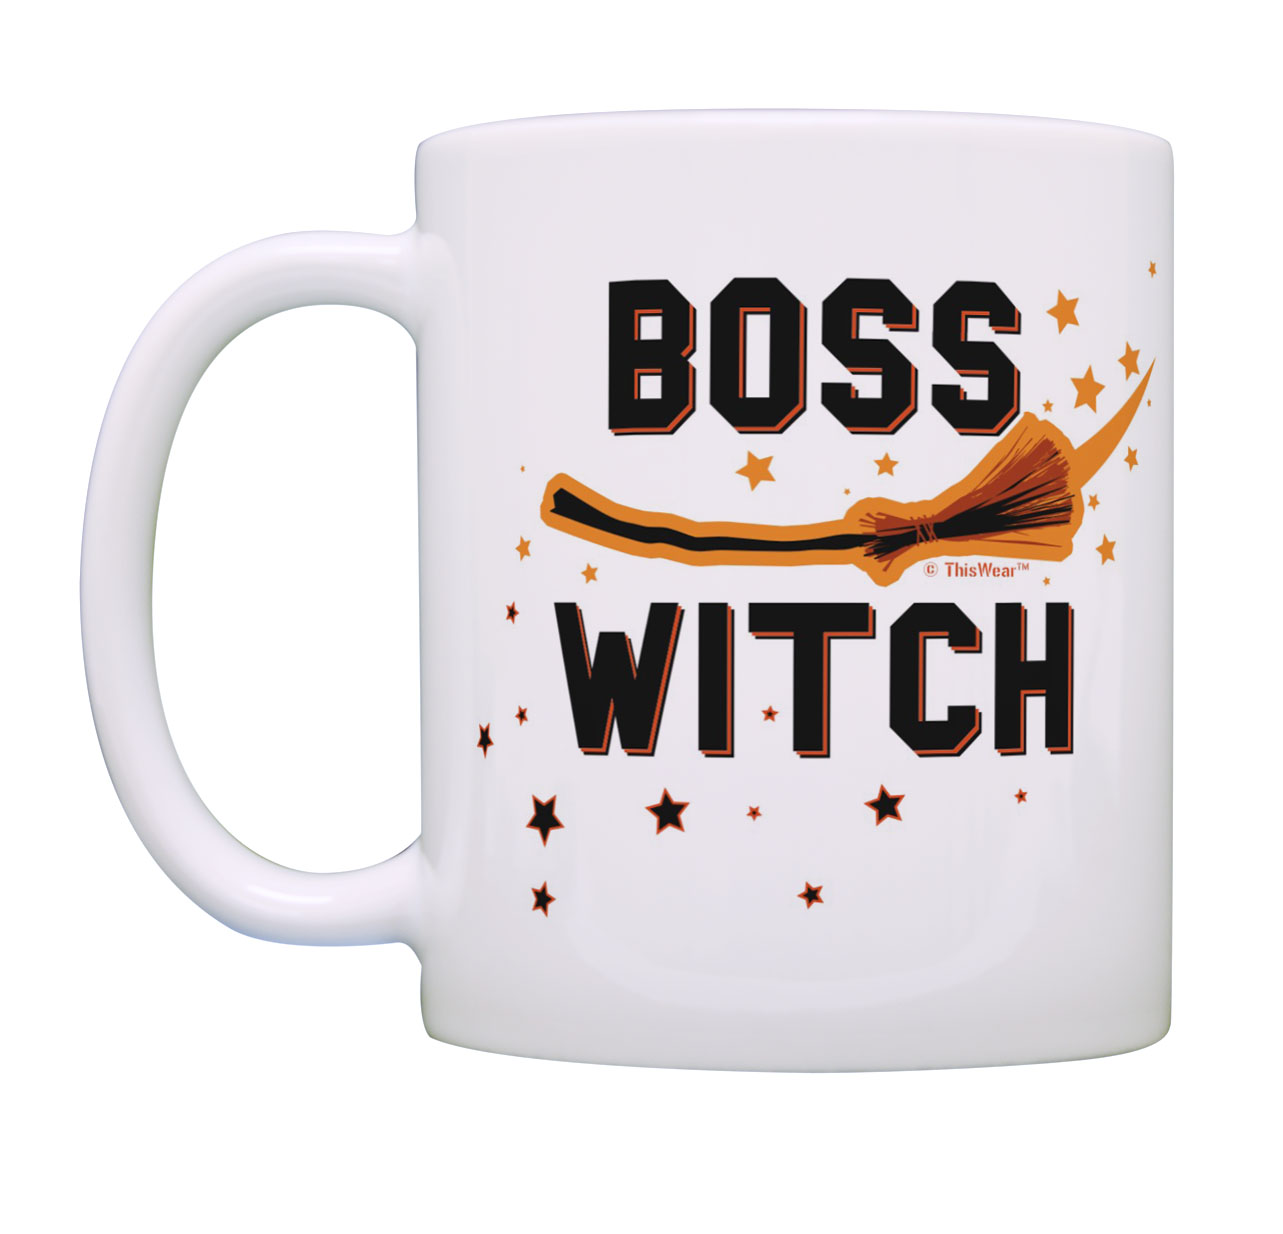 ThisWear Pun Gifts Boss Witch Halloween Mug Set Broomstick Witch Cup 11 ounce 2 Pack Coffee Mugs - image 2 of 4